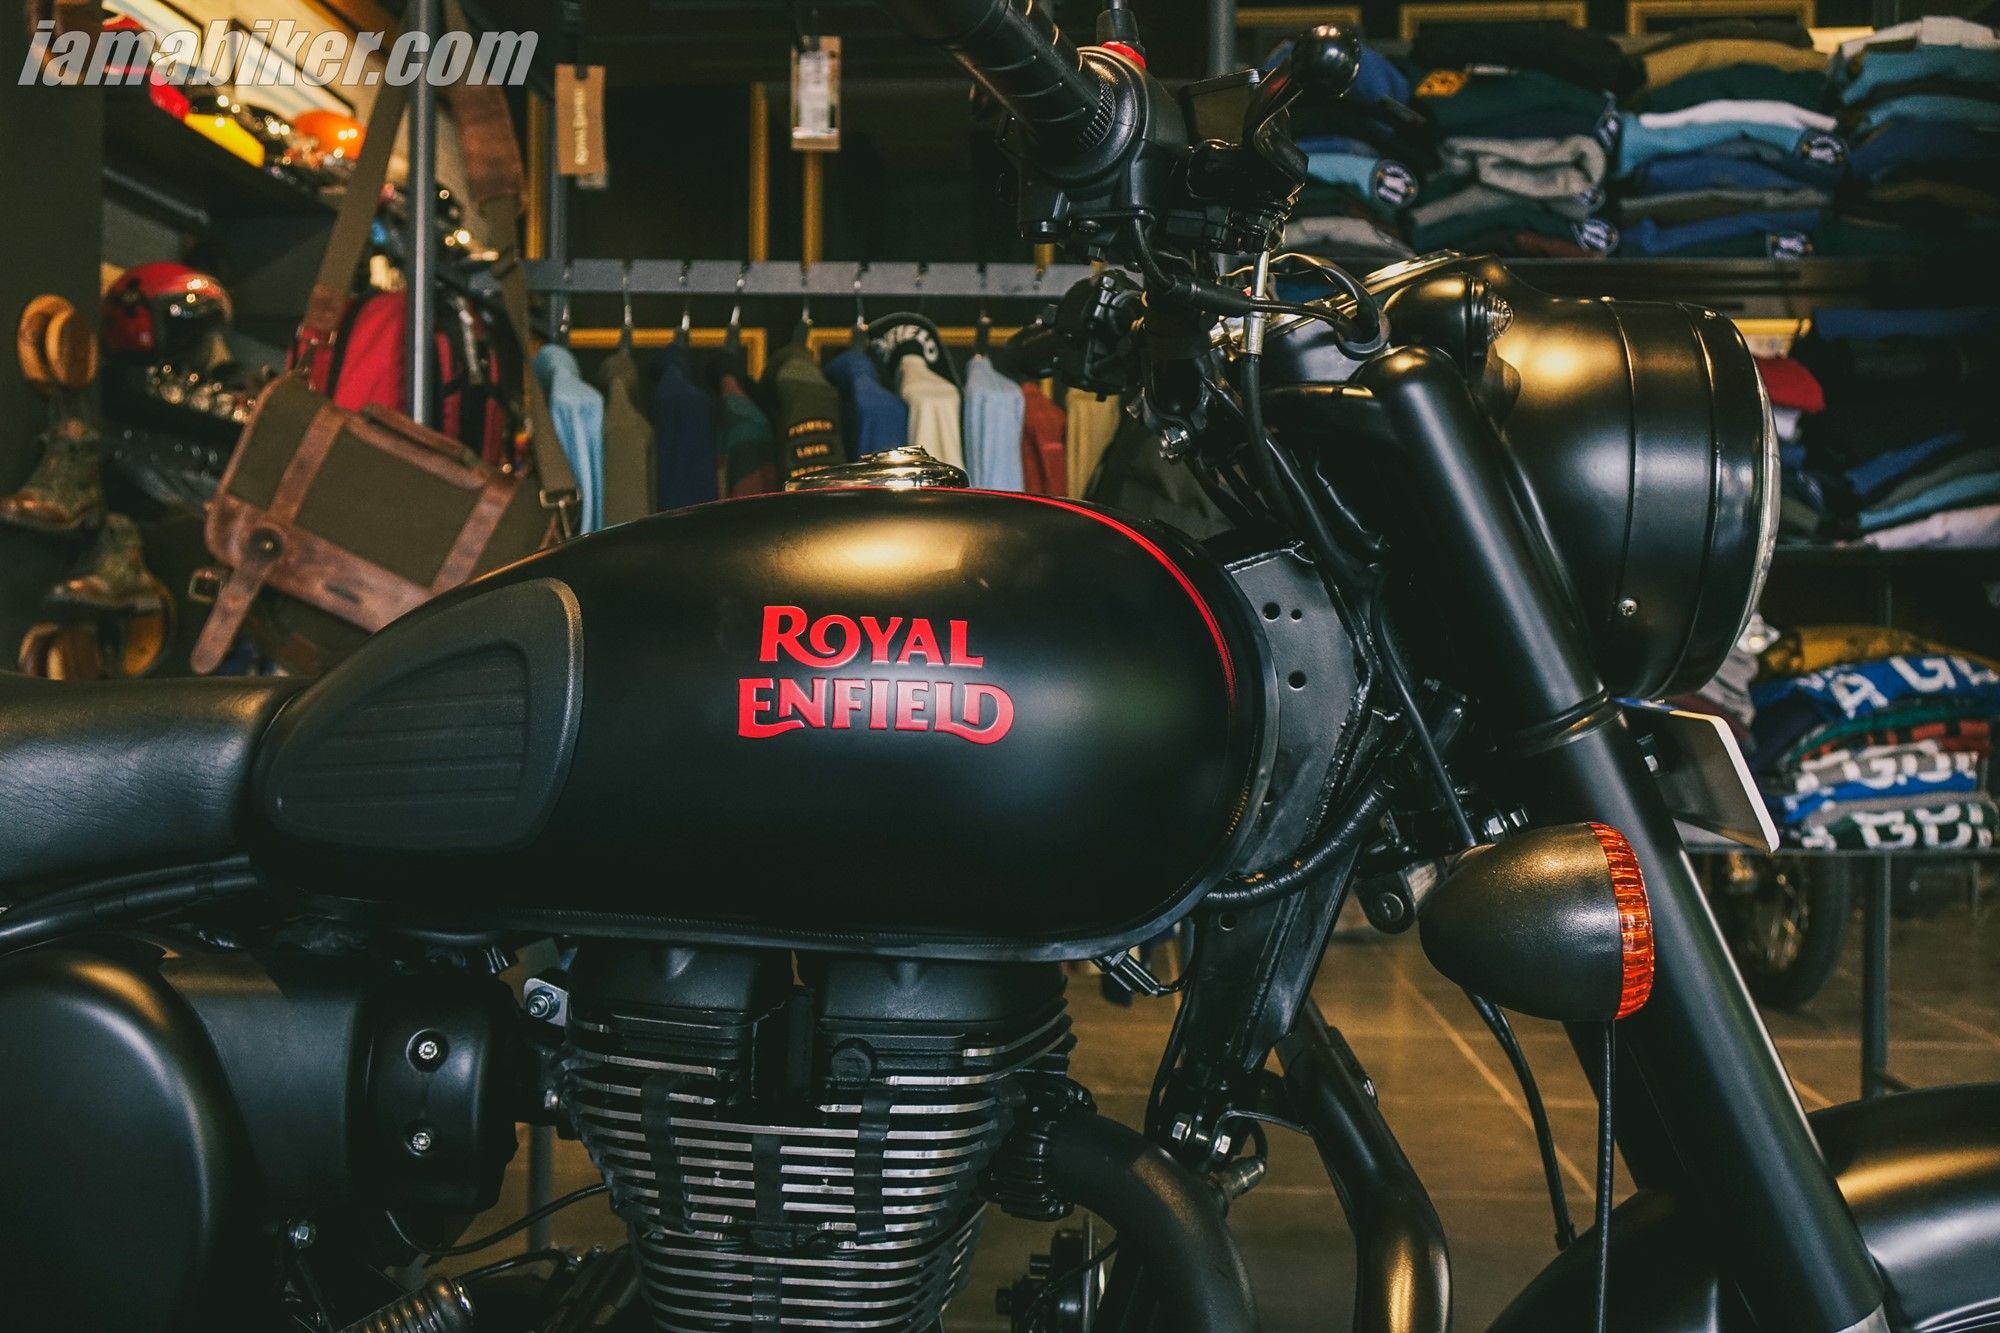 royal enfield classic 350 bs6 stealth black